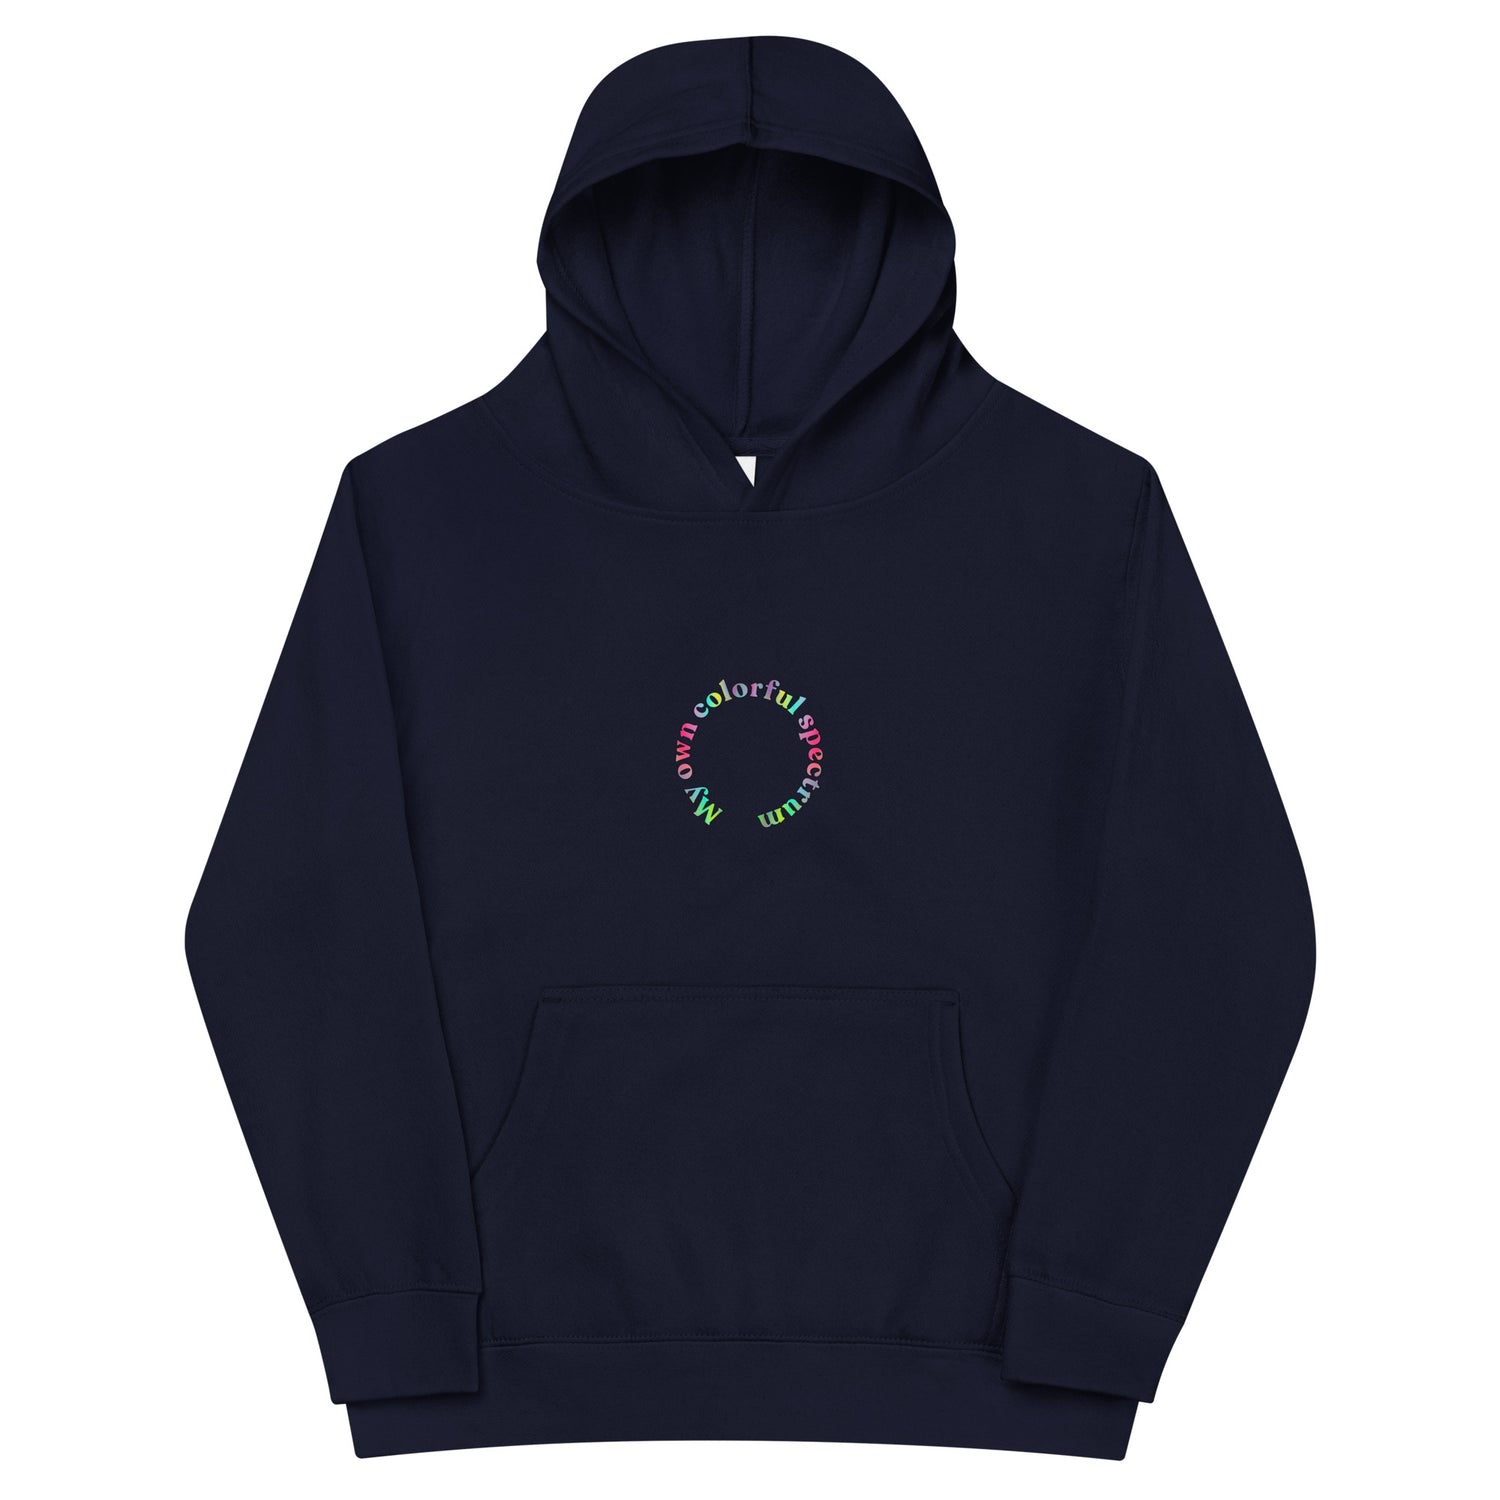 Indigo Kidswear hoodie featuring a "My own colorful spectrum" design with pockets at front.